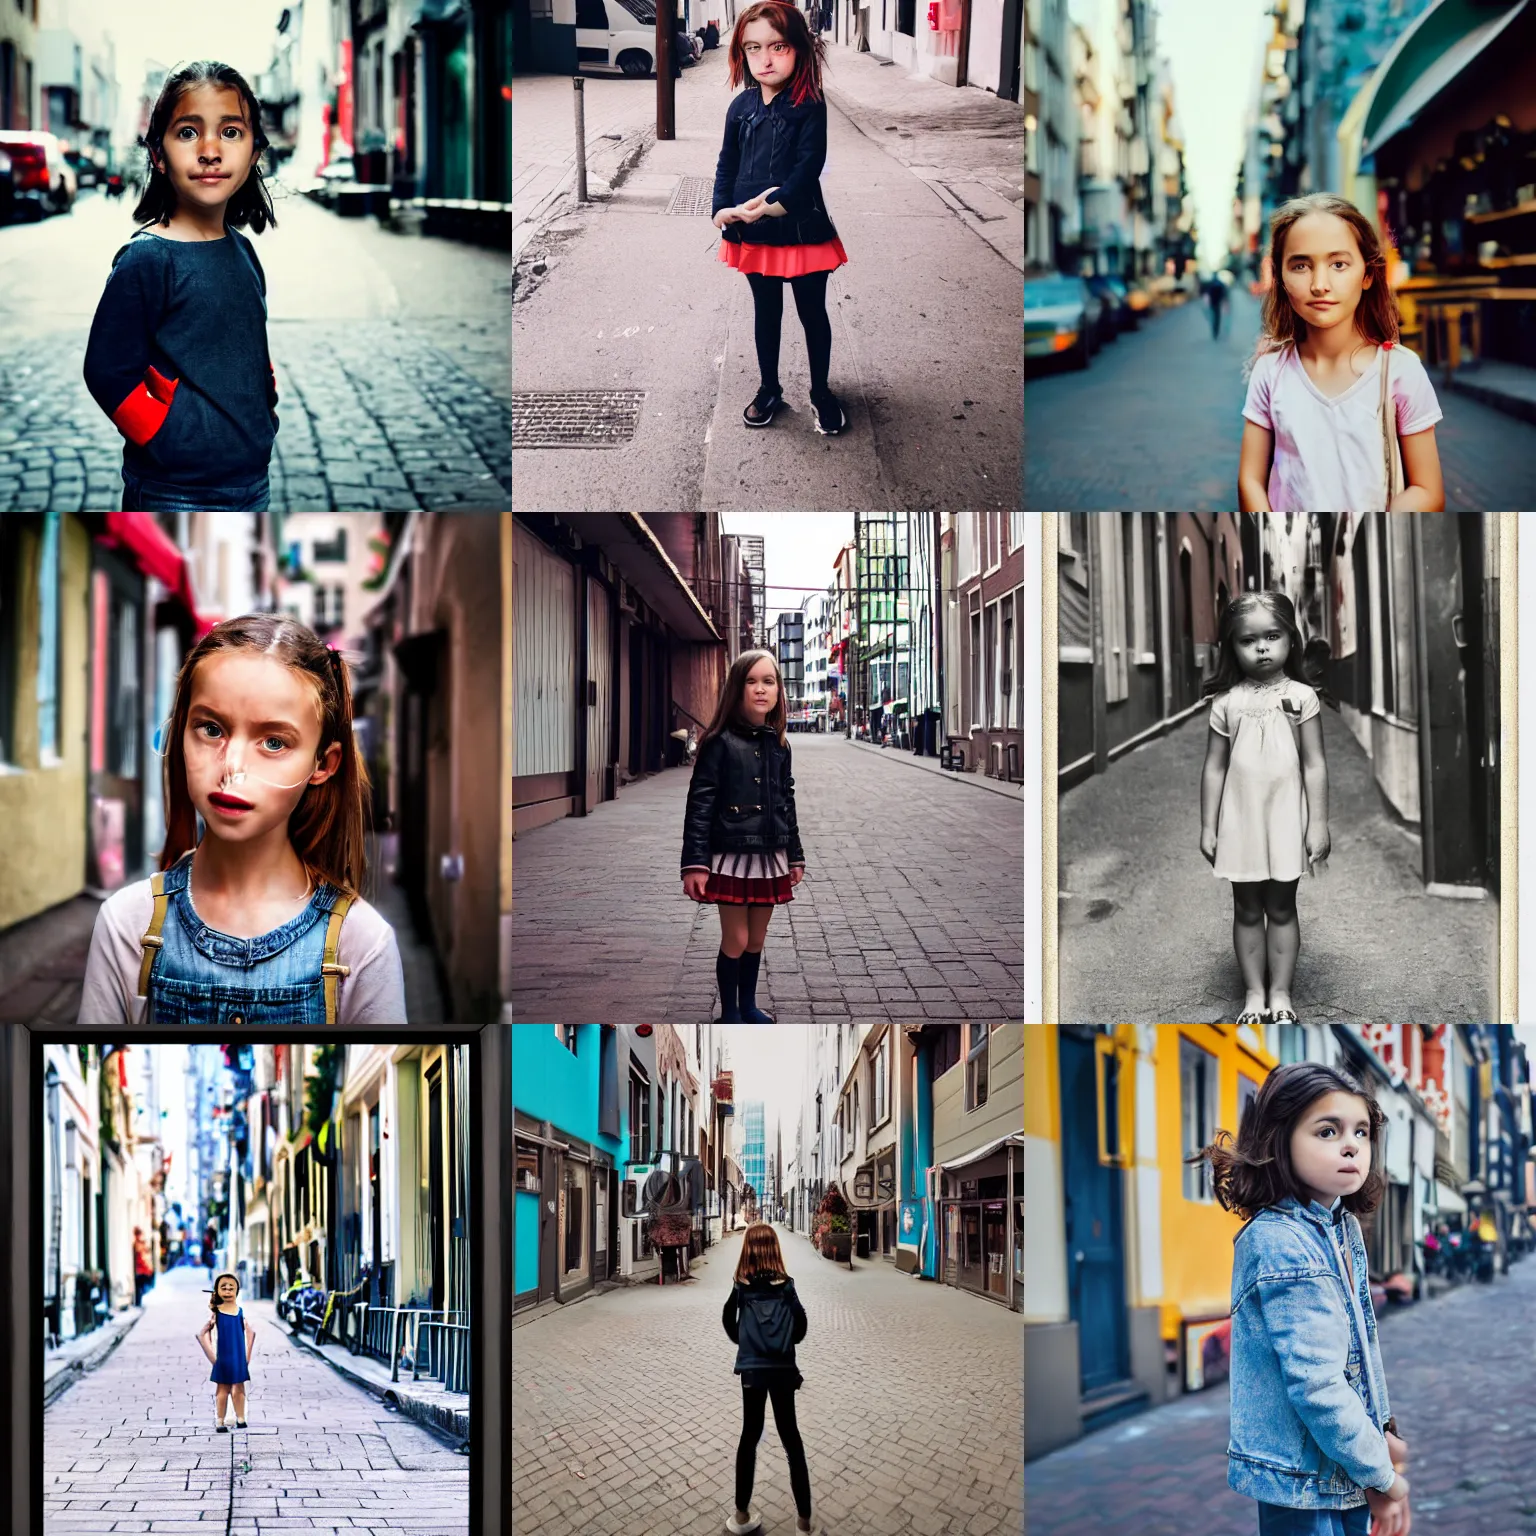 Prompt: tilted frame, dutch angle, skewed shot photoreal portrait of curious girl standing in city street looking at camera.